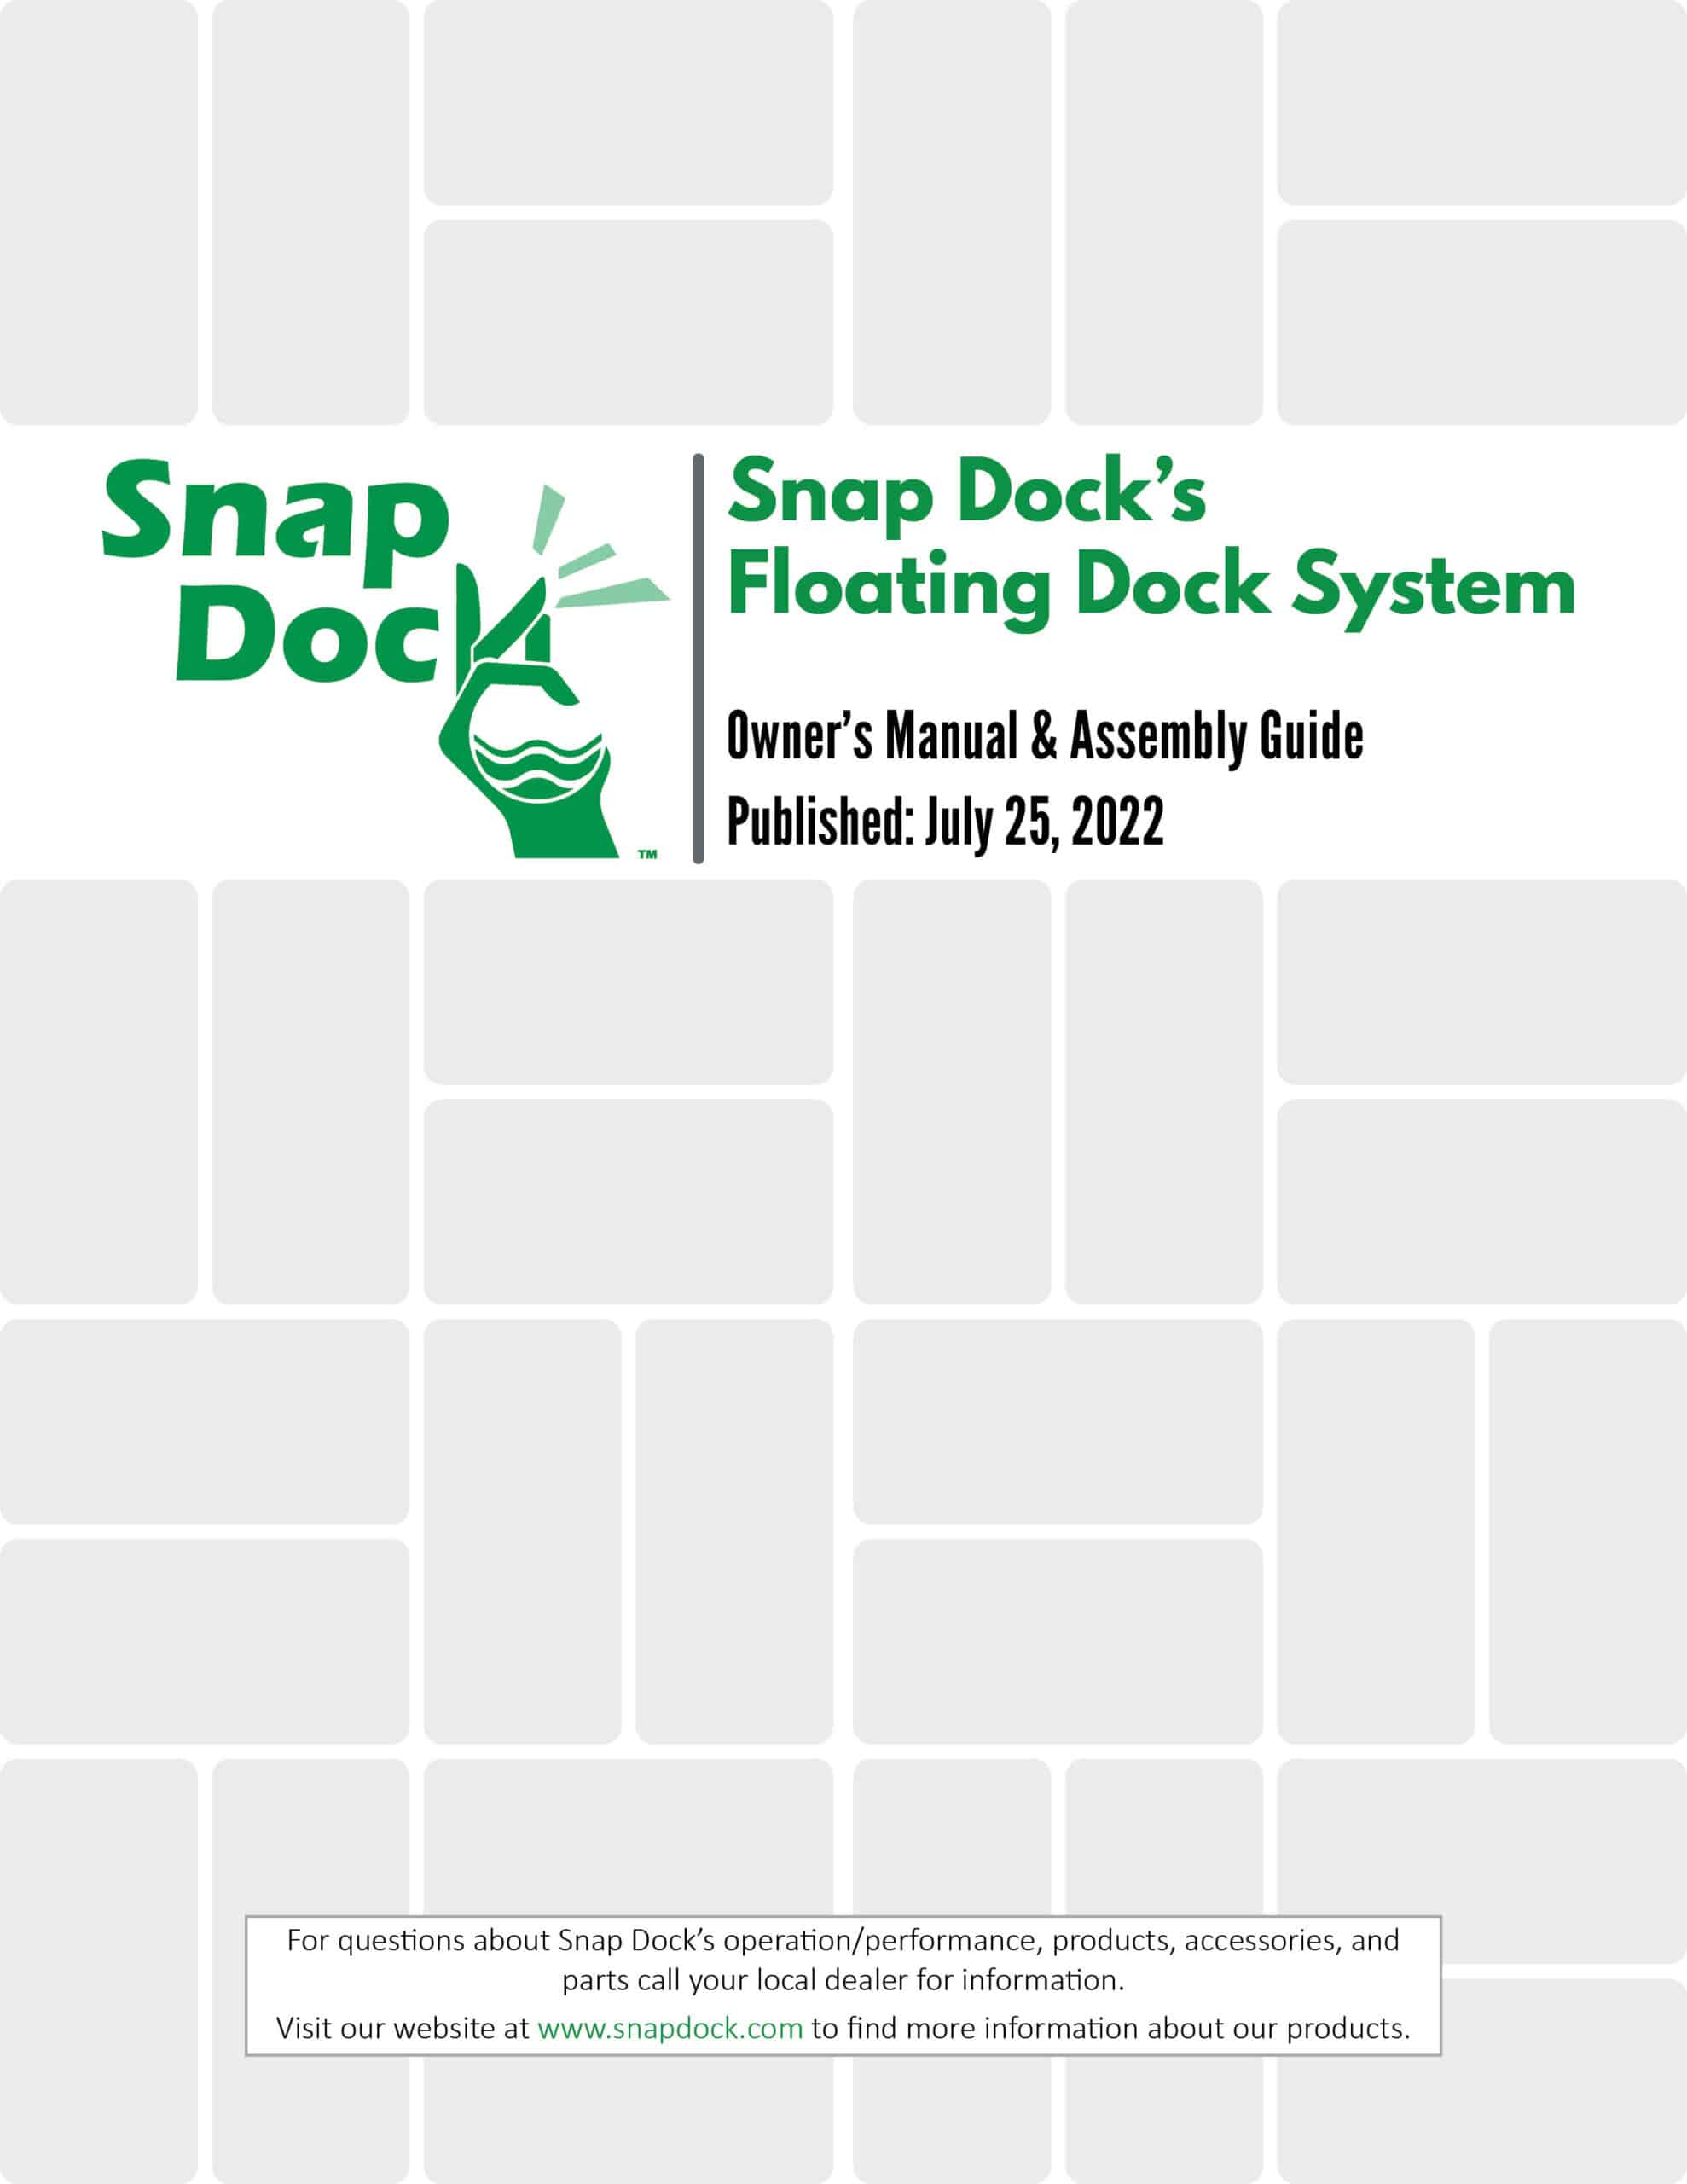 Snap-Dock-Floating-Dock-Owners-Manual-scaled